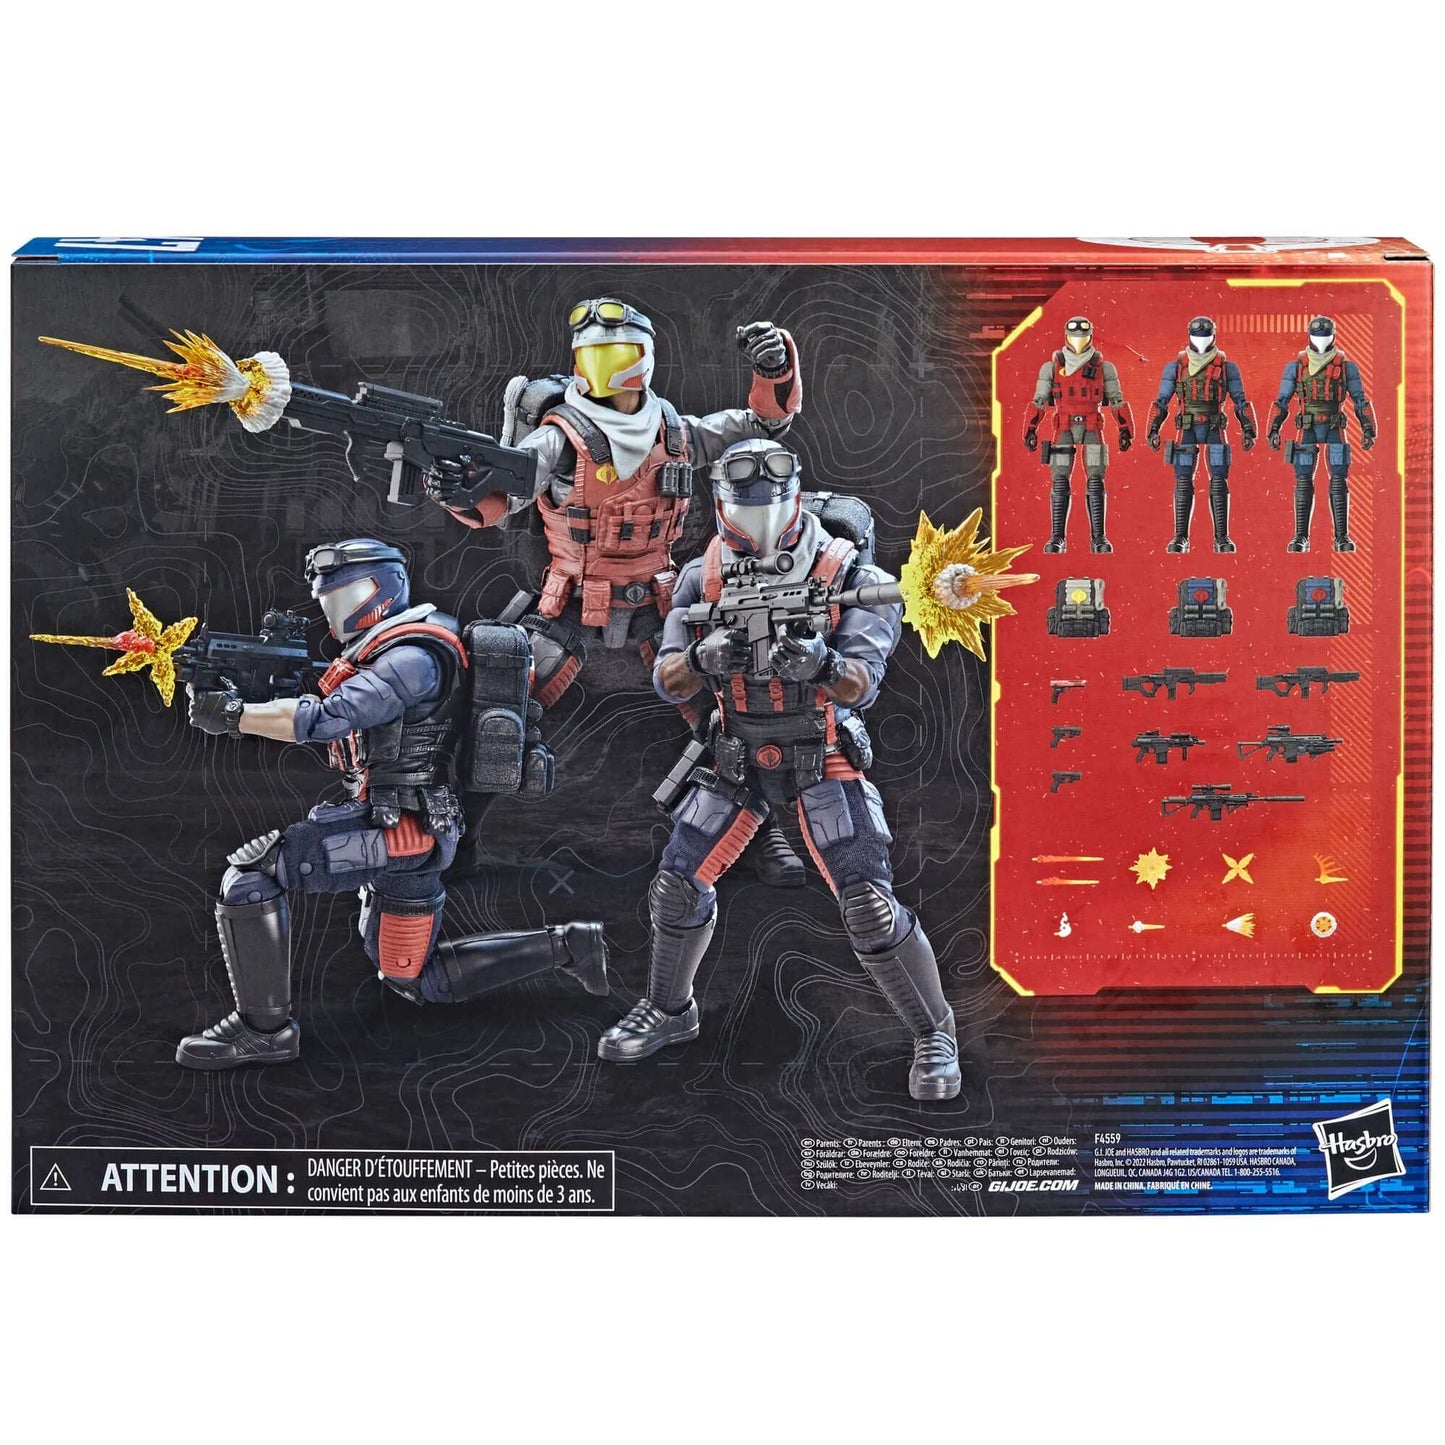 Hasbro G.I. Joe Classified Series Cobra Viper Officer & Vipers Action Figures back of packaging